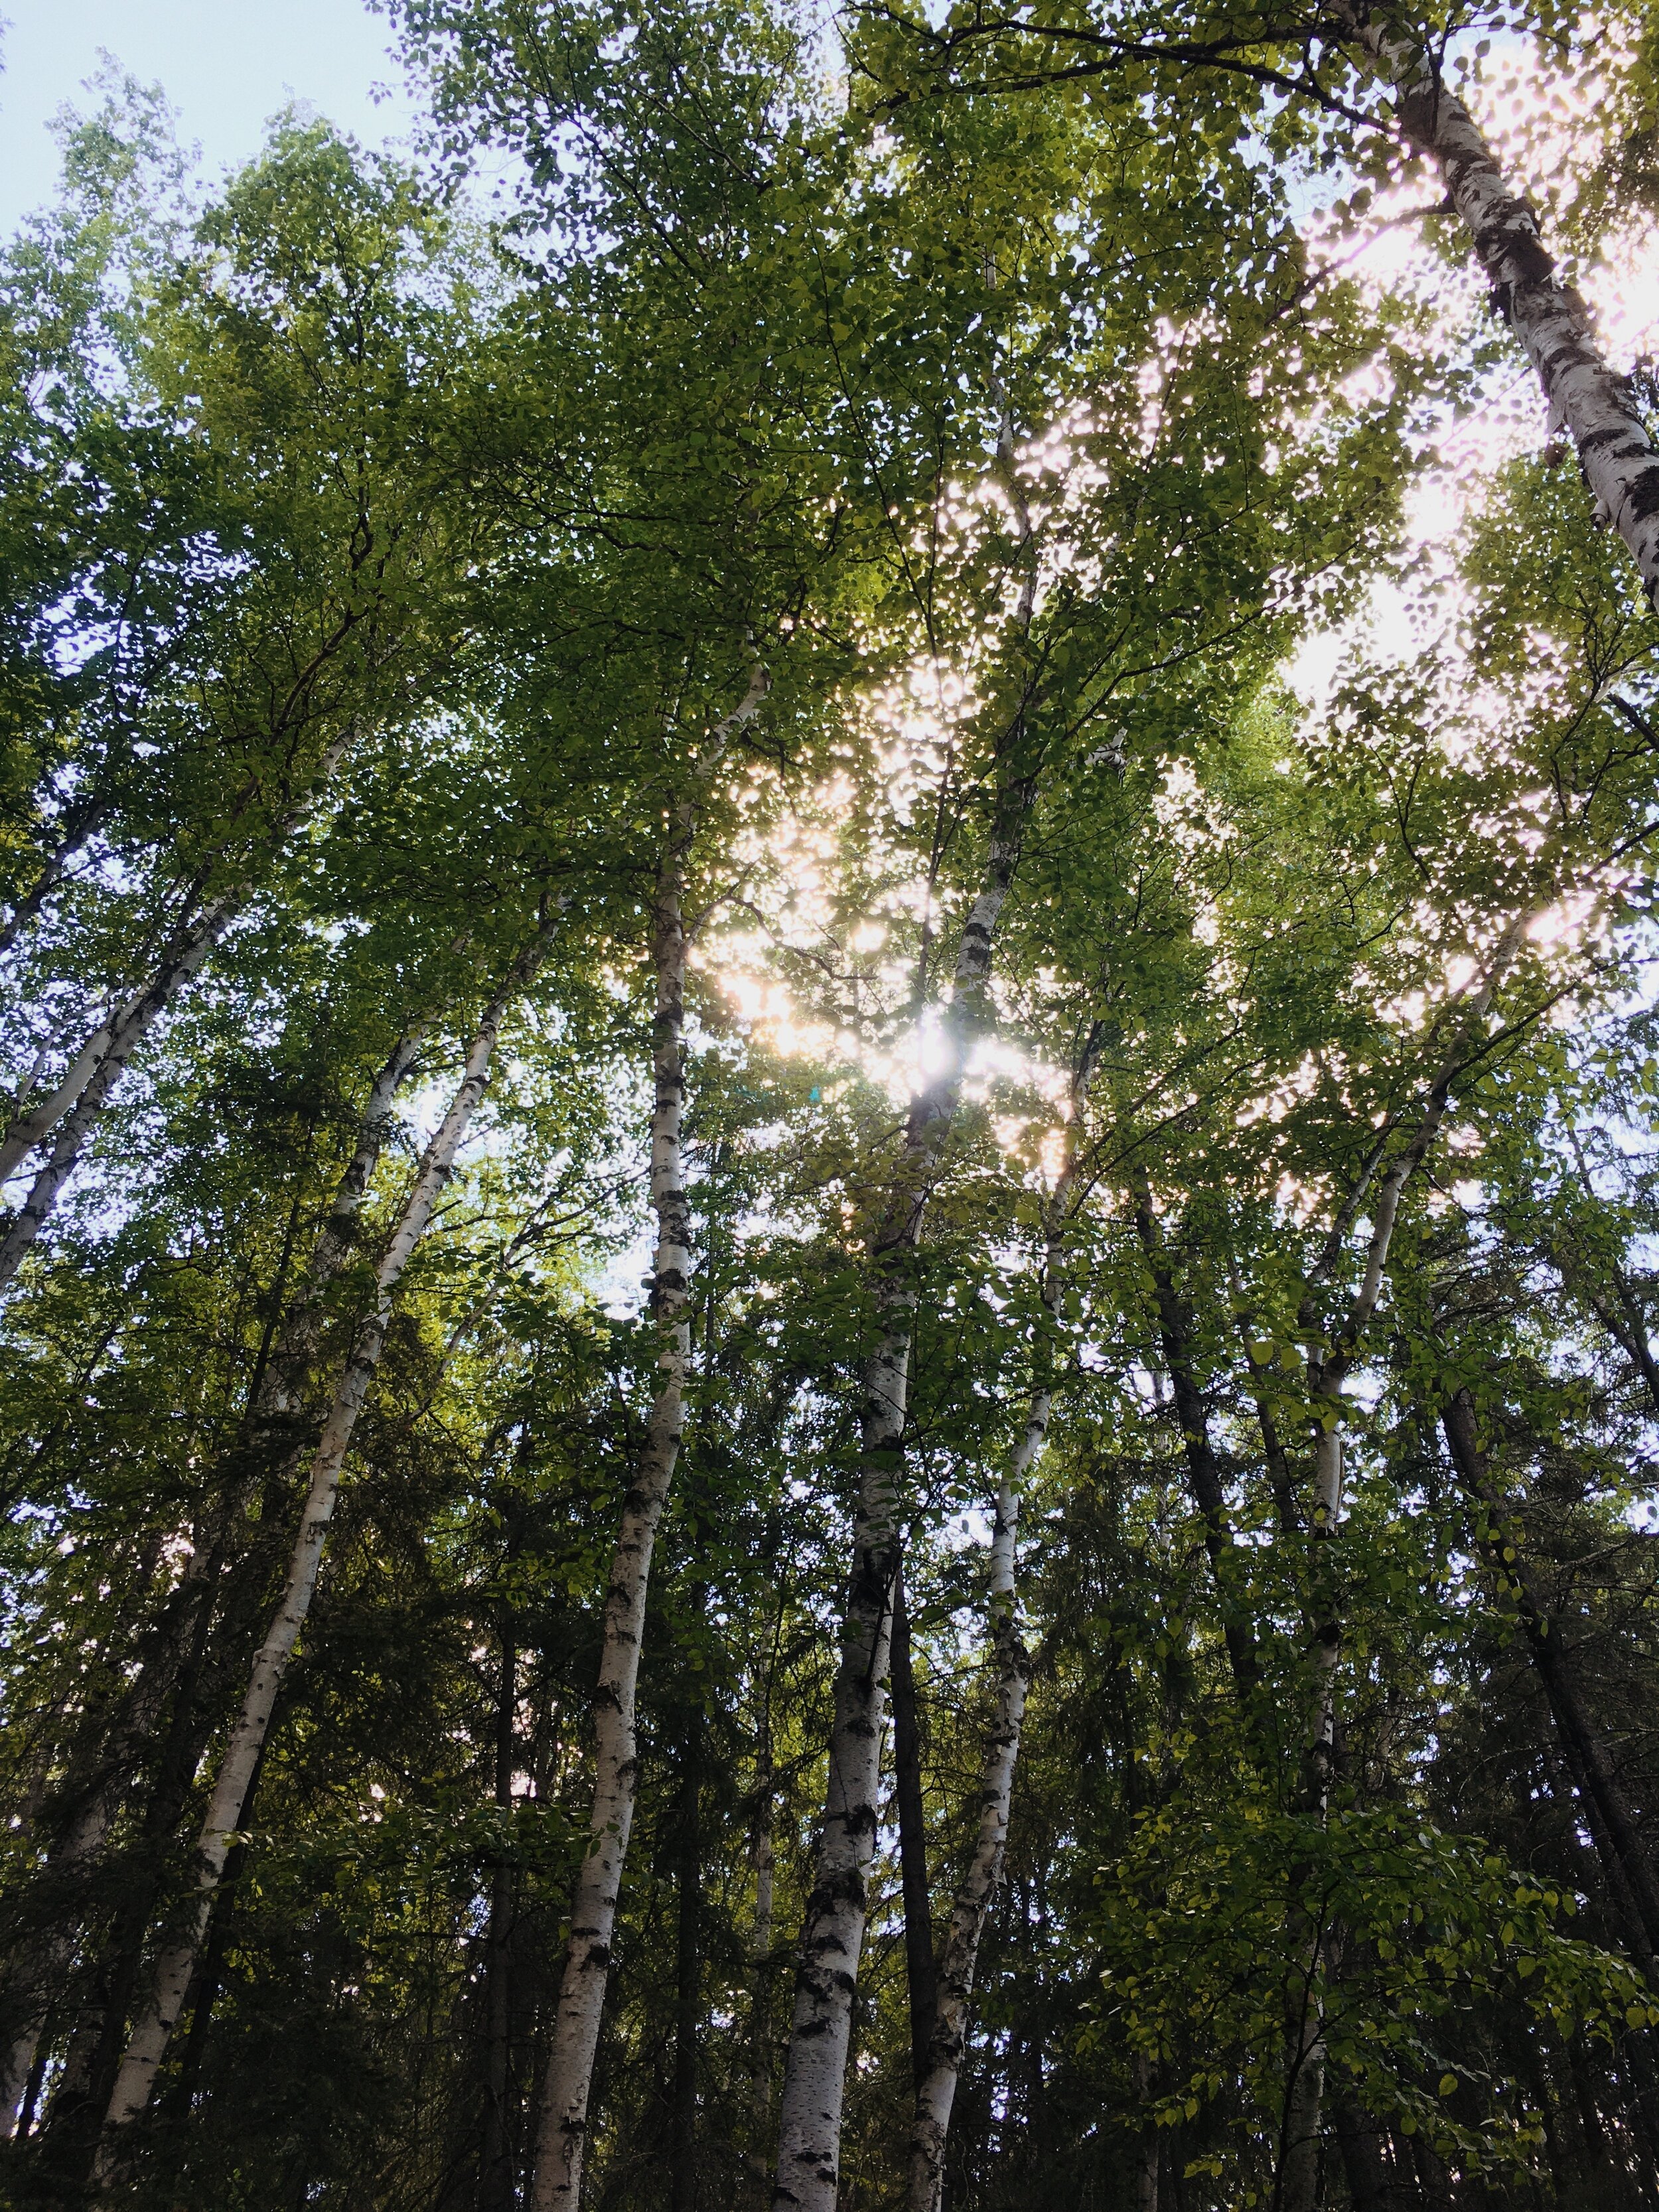 Image from a hike with my familyImage description: sunlight shining through trees